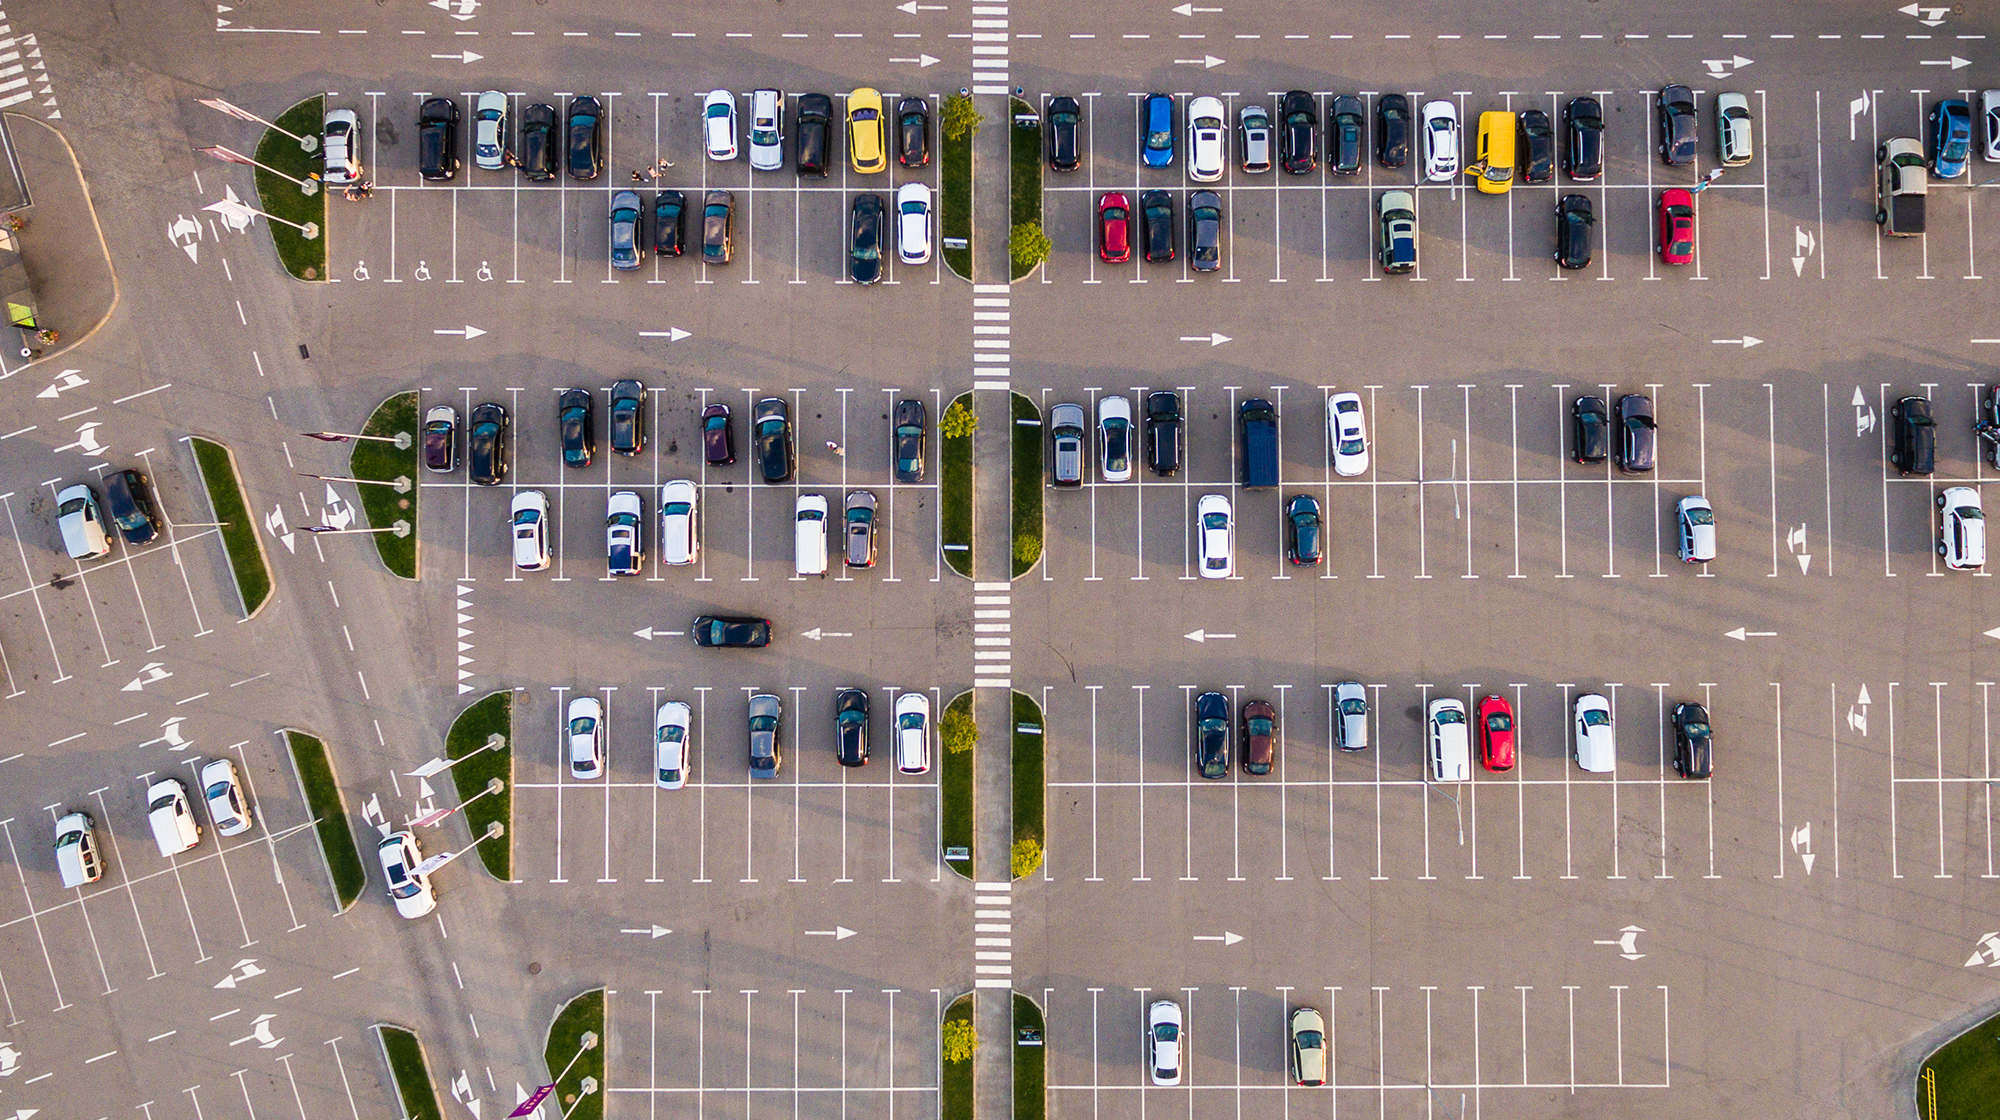 Parking Management Systems